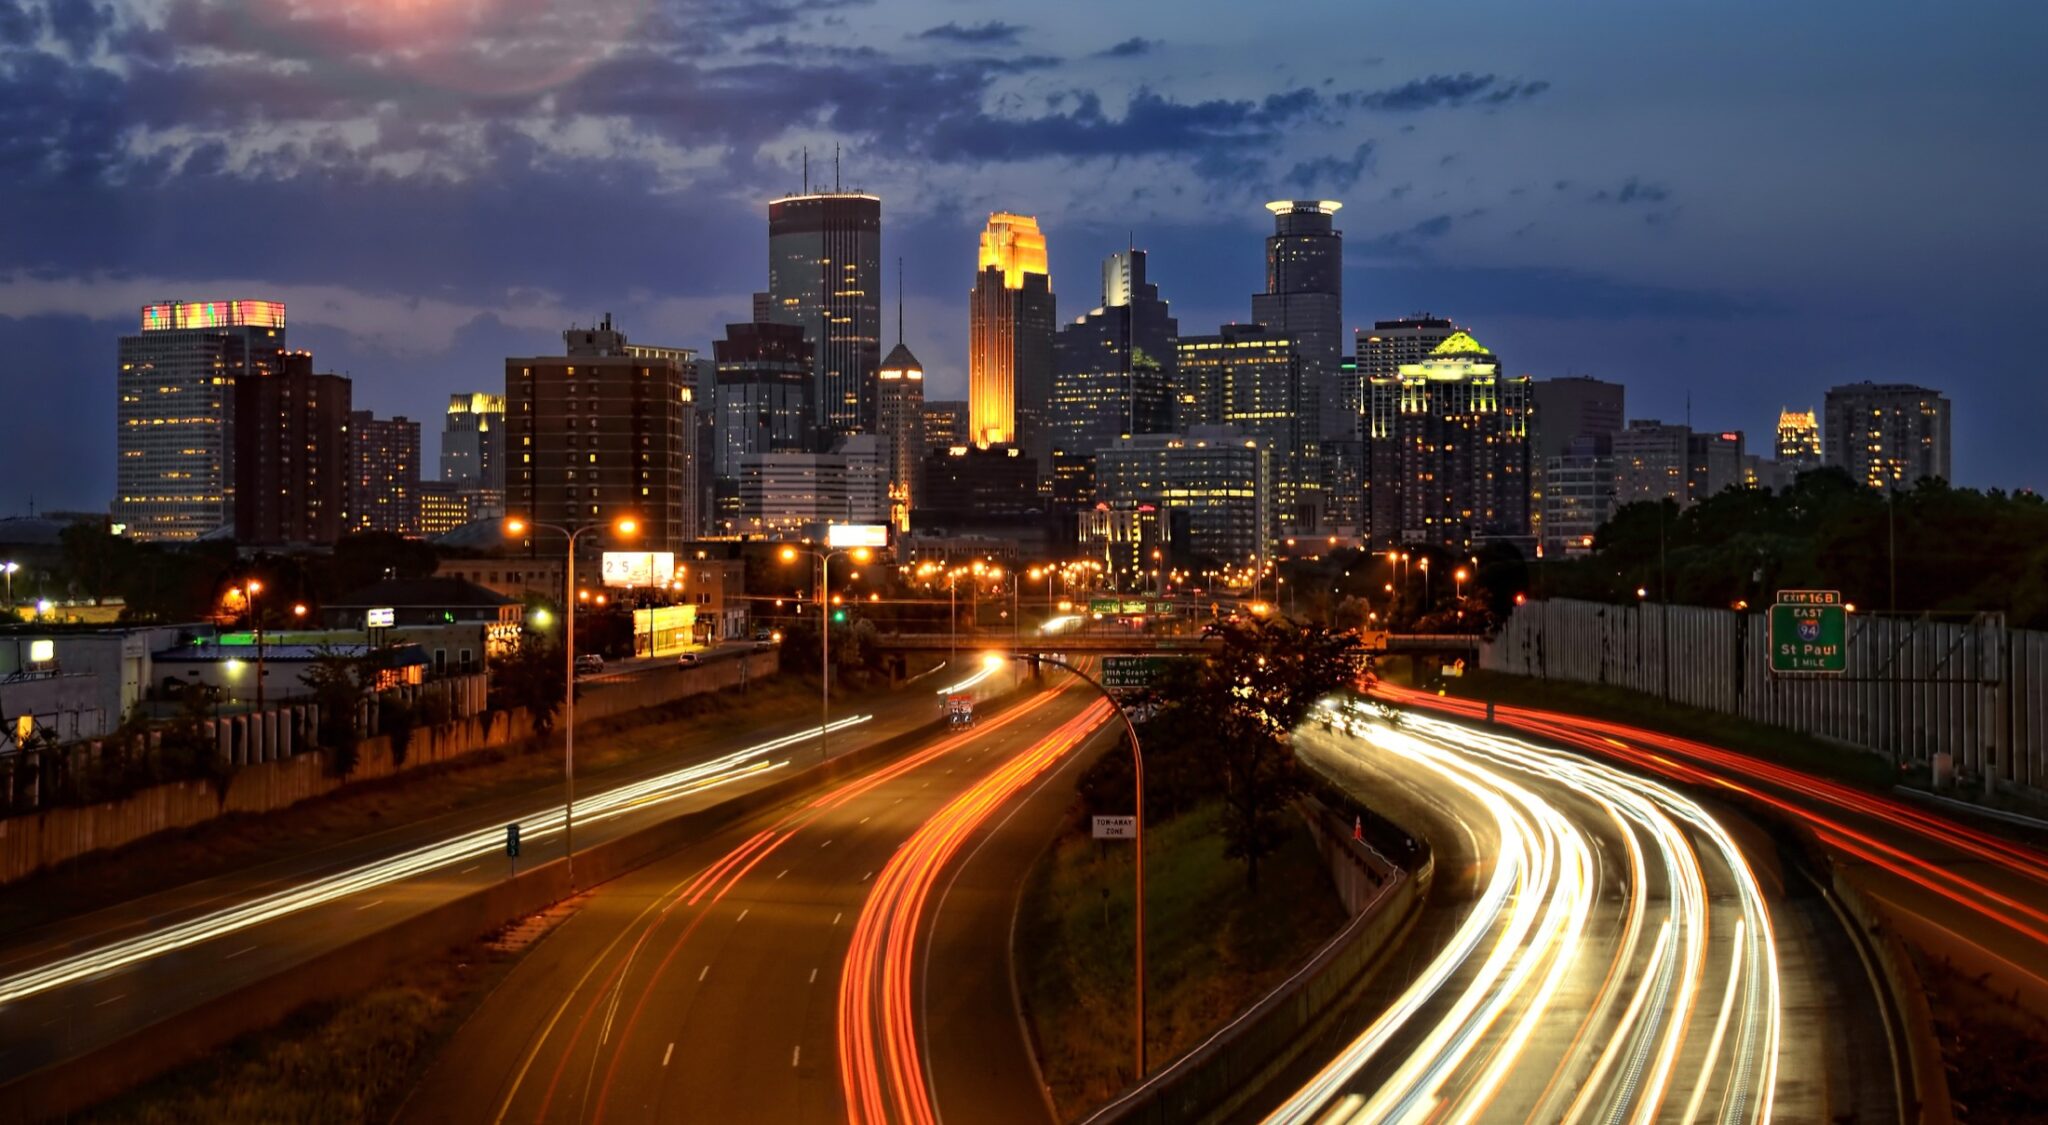 The highways entering and leaving Minneapolis with light paths